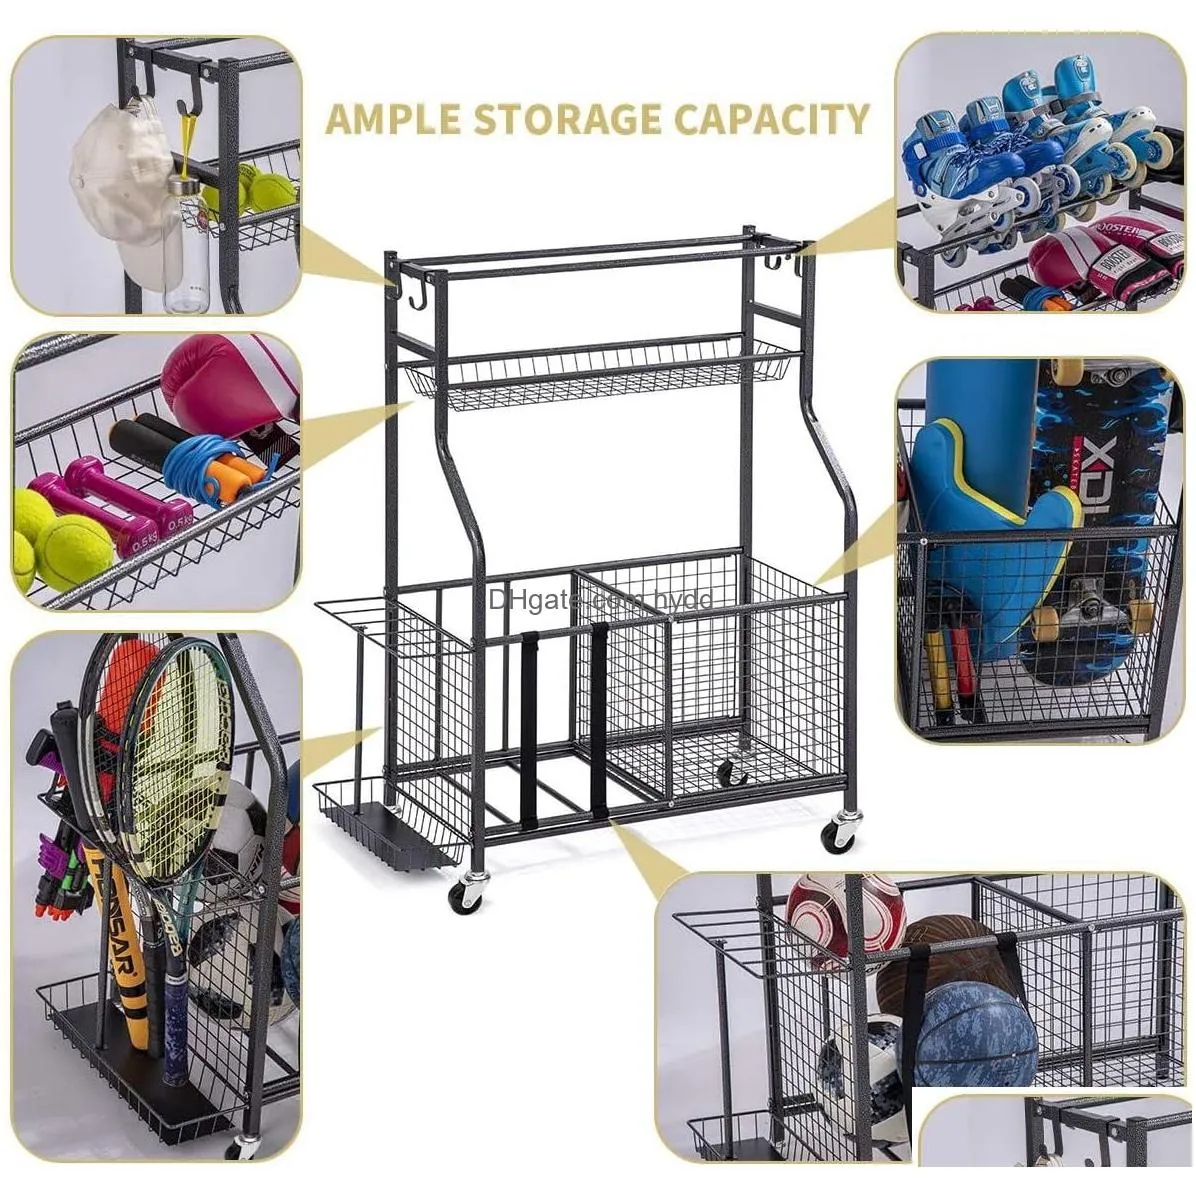 garage sports equipment storage organizer with baskets and hooks - easy to assemble - sports ball gear rack holds basketballs baseball